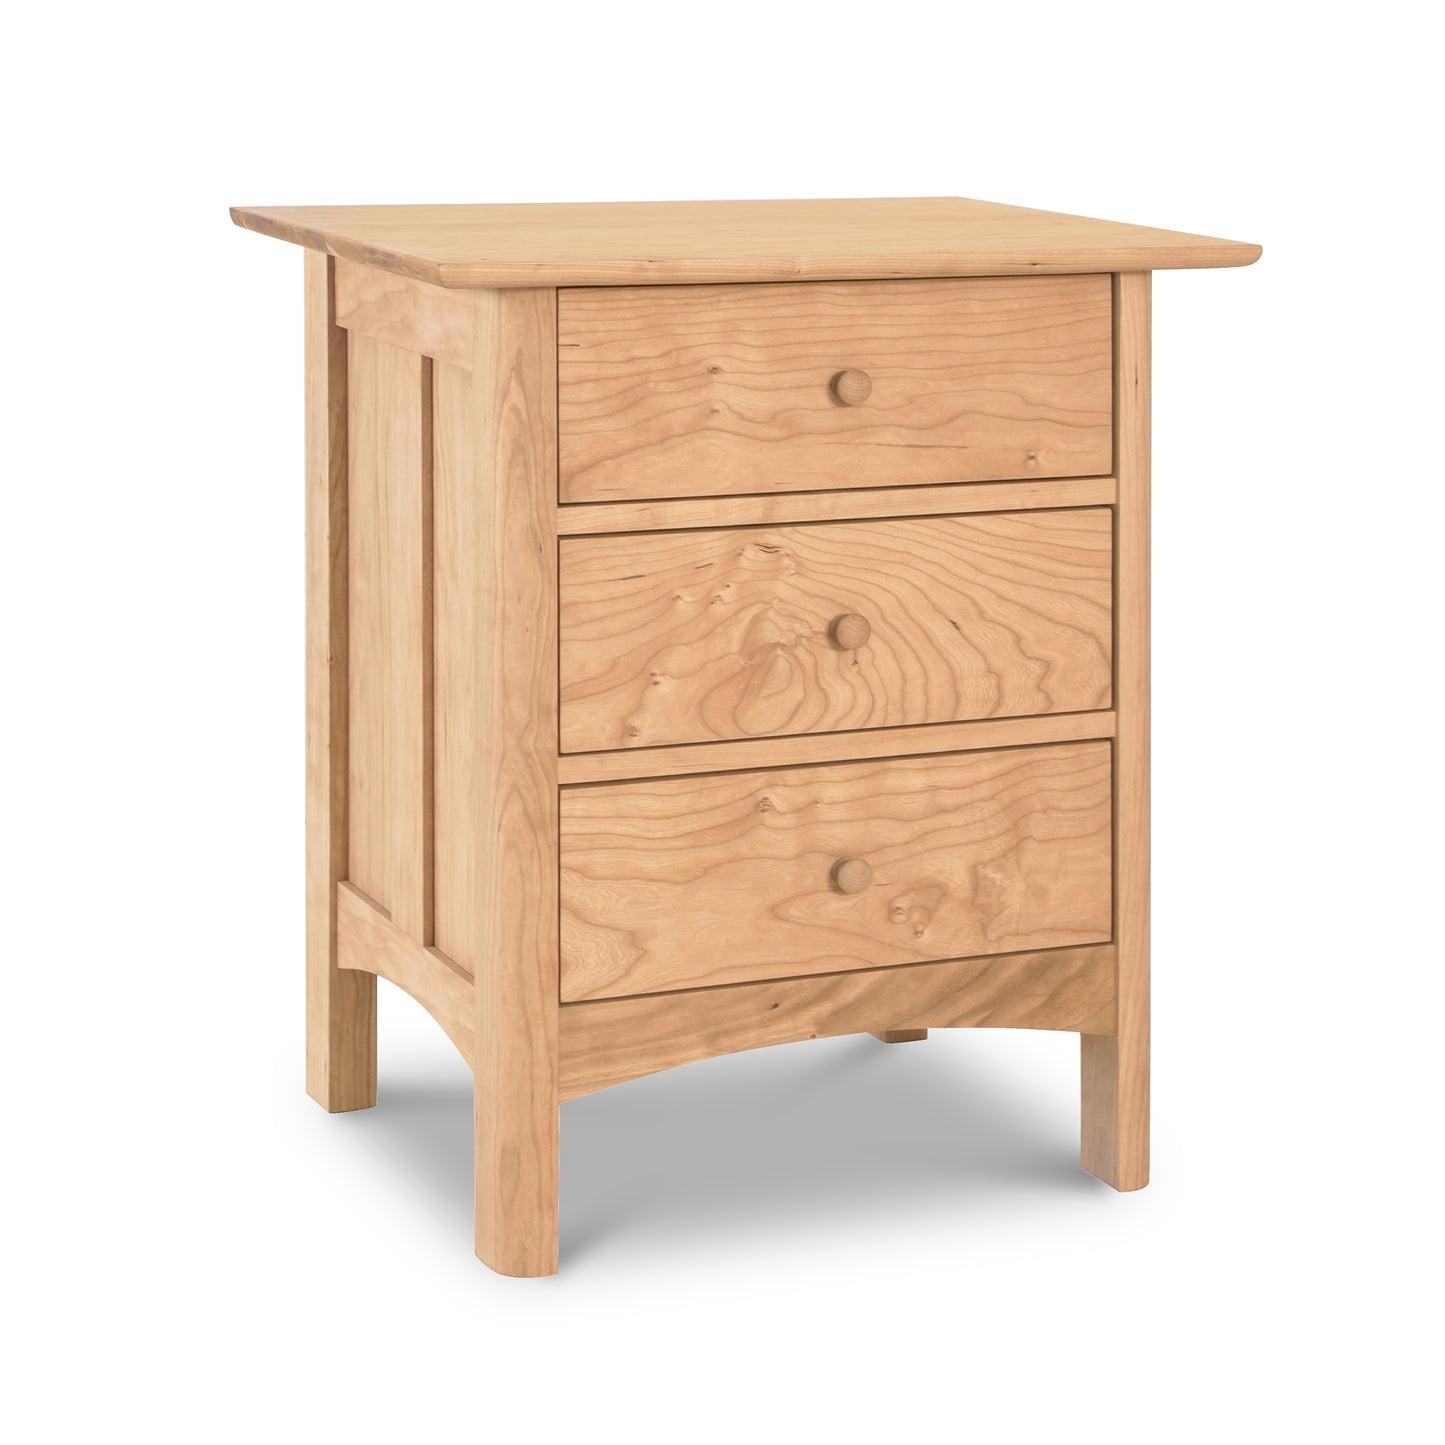 A Heartwood Shaker 3-Drawer Nightstand by Vermont Furniture Designs isolated on a white background.